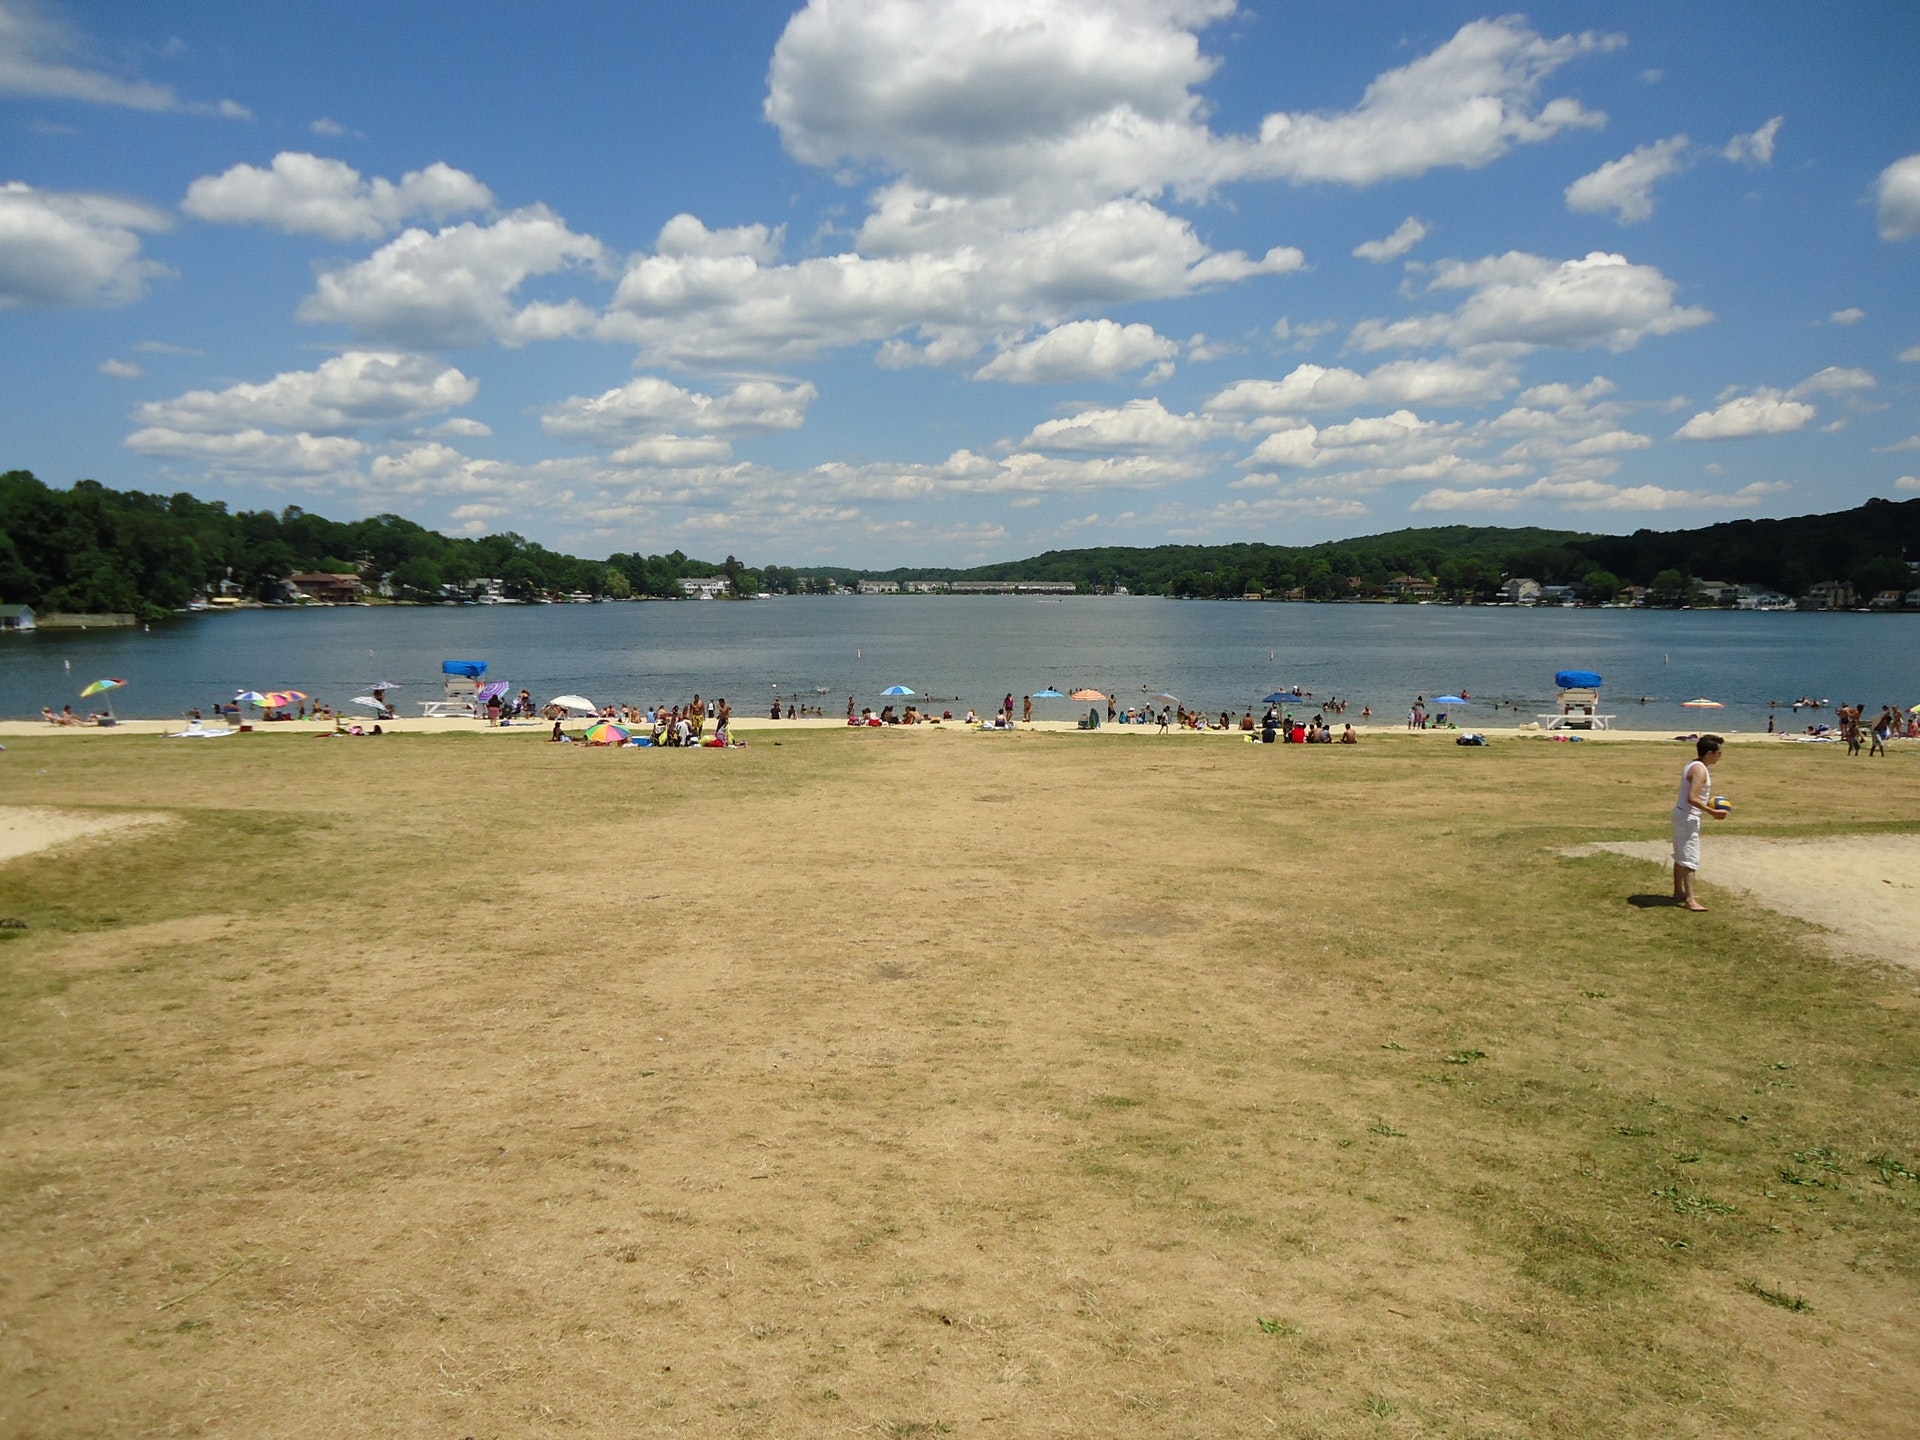 Hopatcong State Park, a New Jersey State Park located near Basking